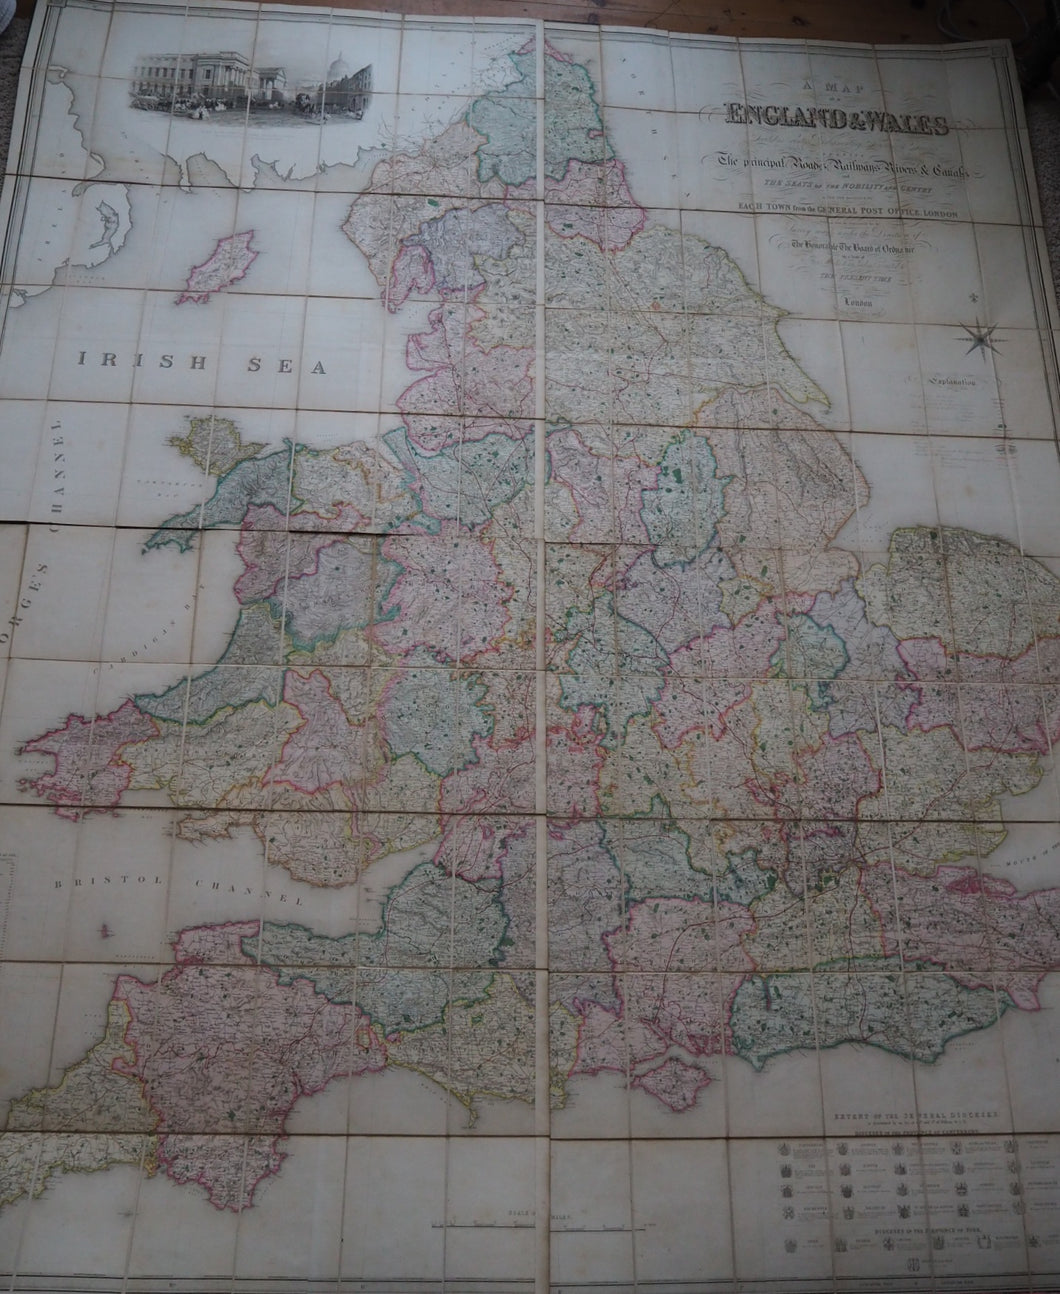 Map of England & Wales Divided into Counties, Parliamentary Divisions and Dioceses. Shewing the Principal Roads, Railways, Rivers and Canals. Publication Date: 1840 Condition: Very Good